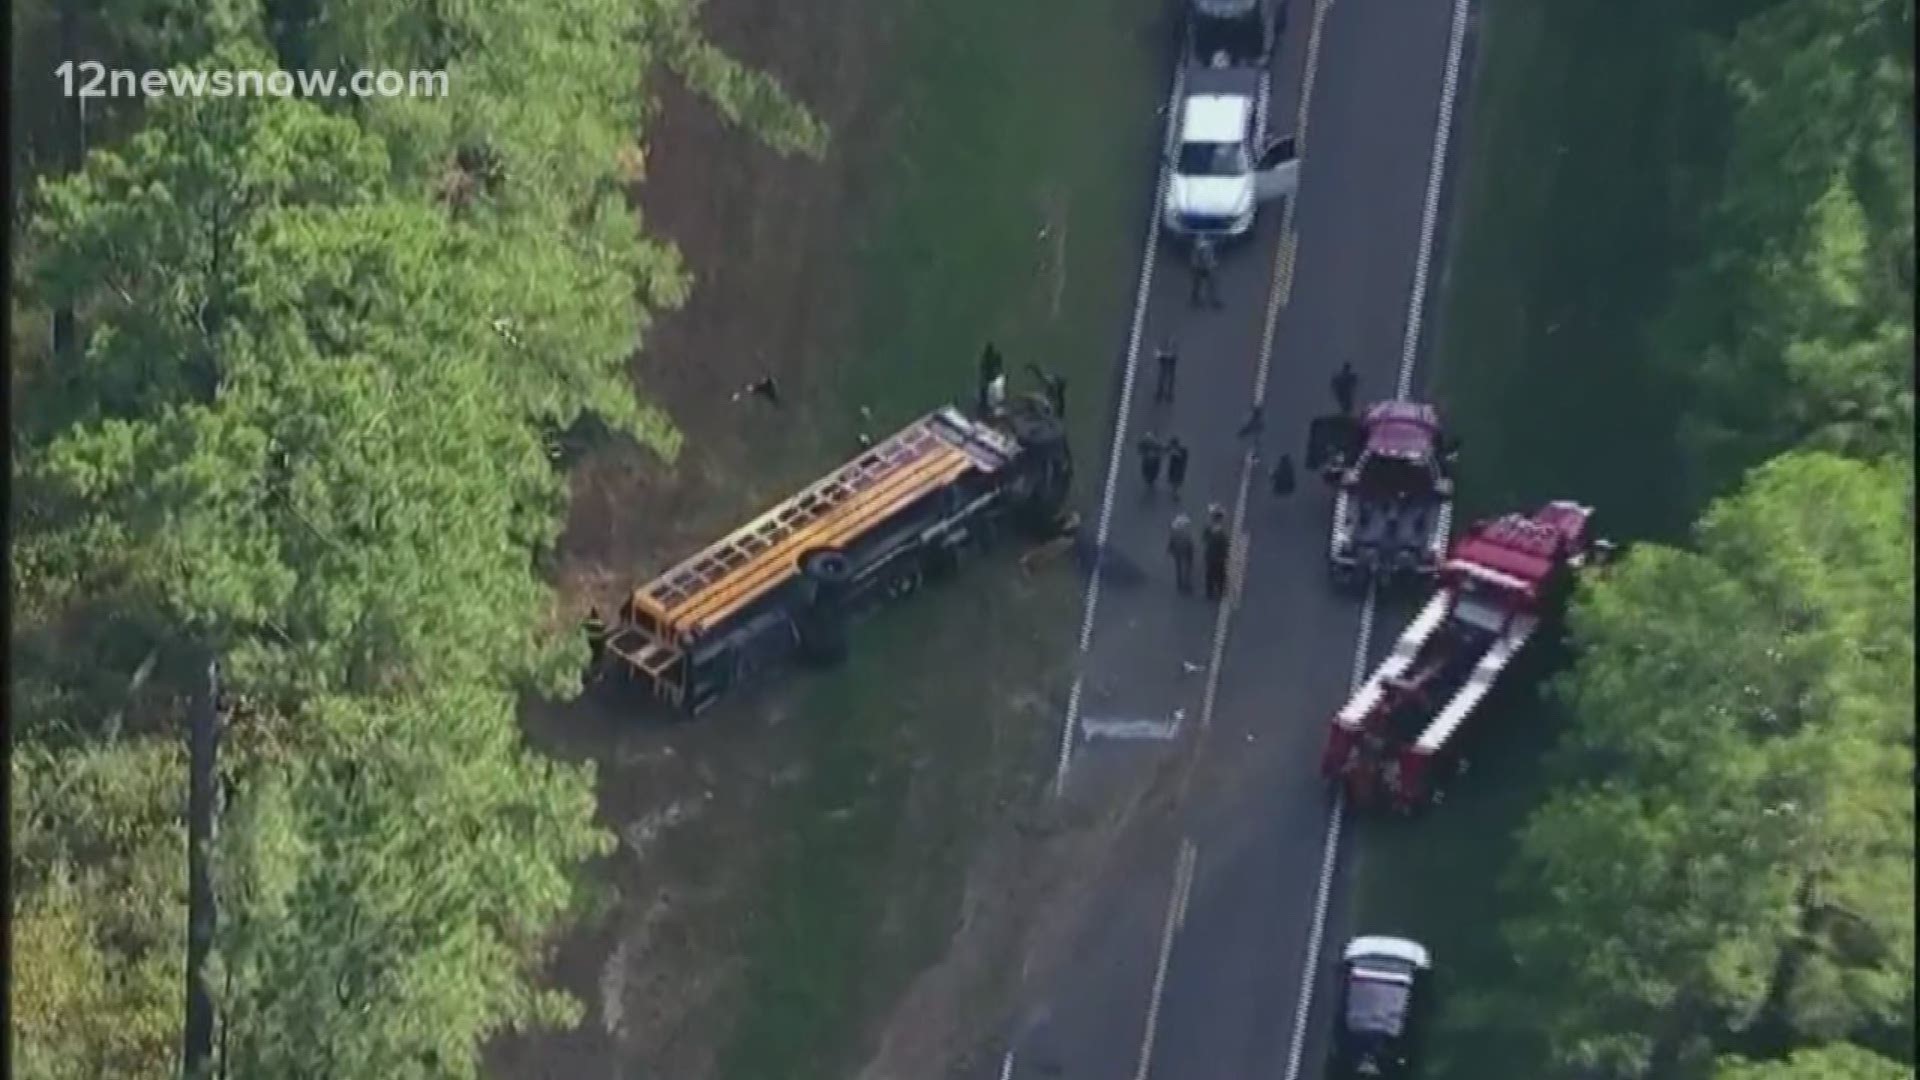 DPS is investigating how a school bus carrying a high school football team rolled over on its way to a game. This happened in Montgomery County.